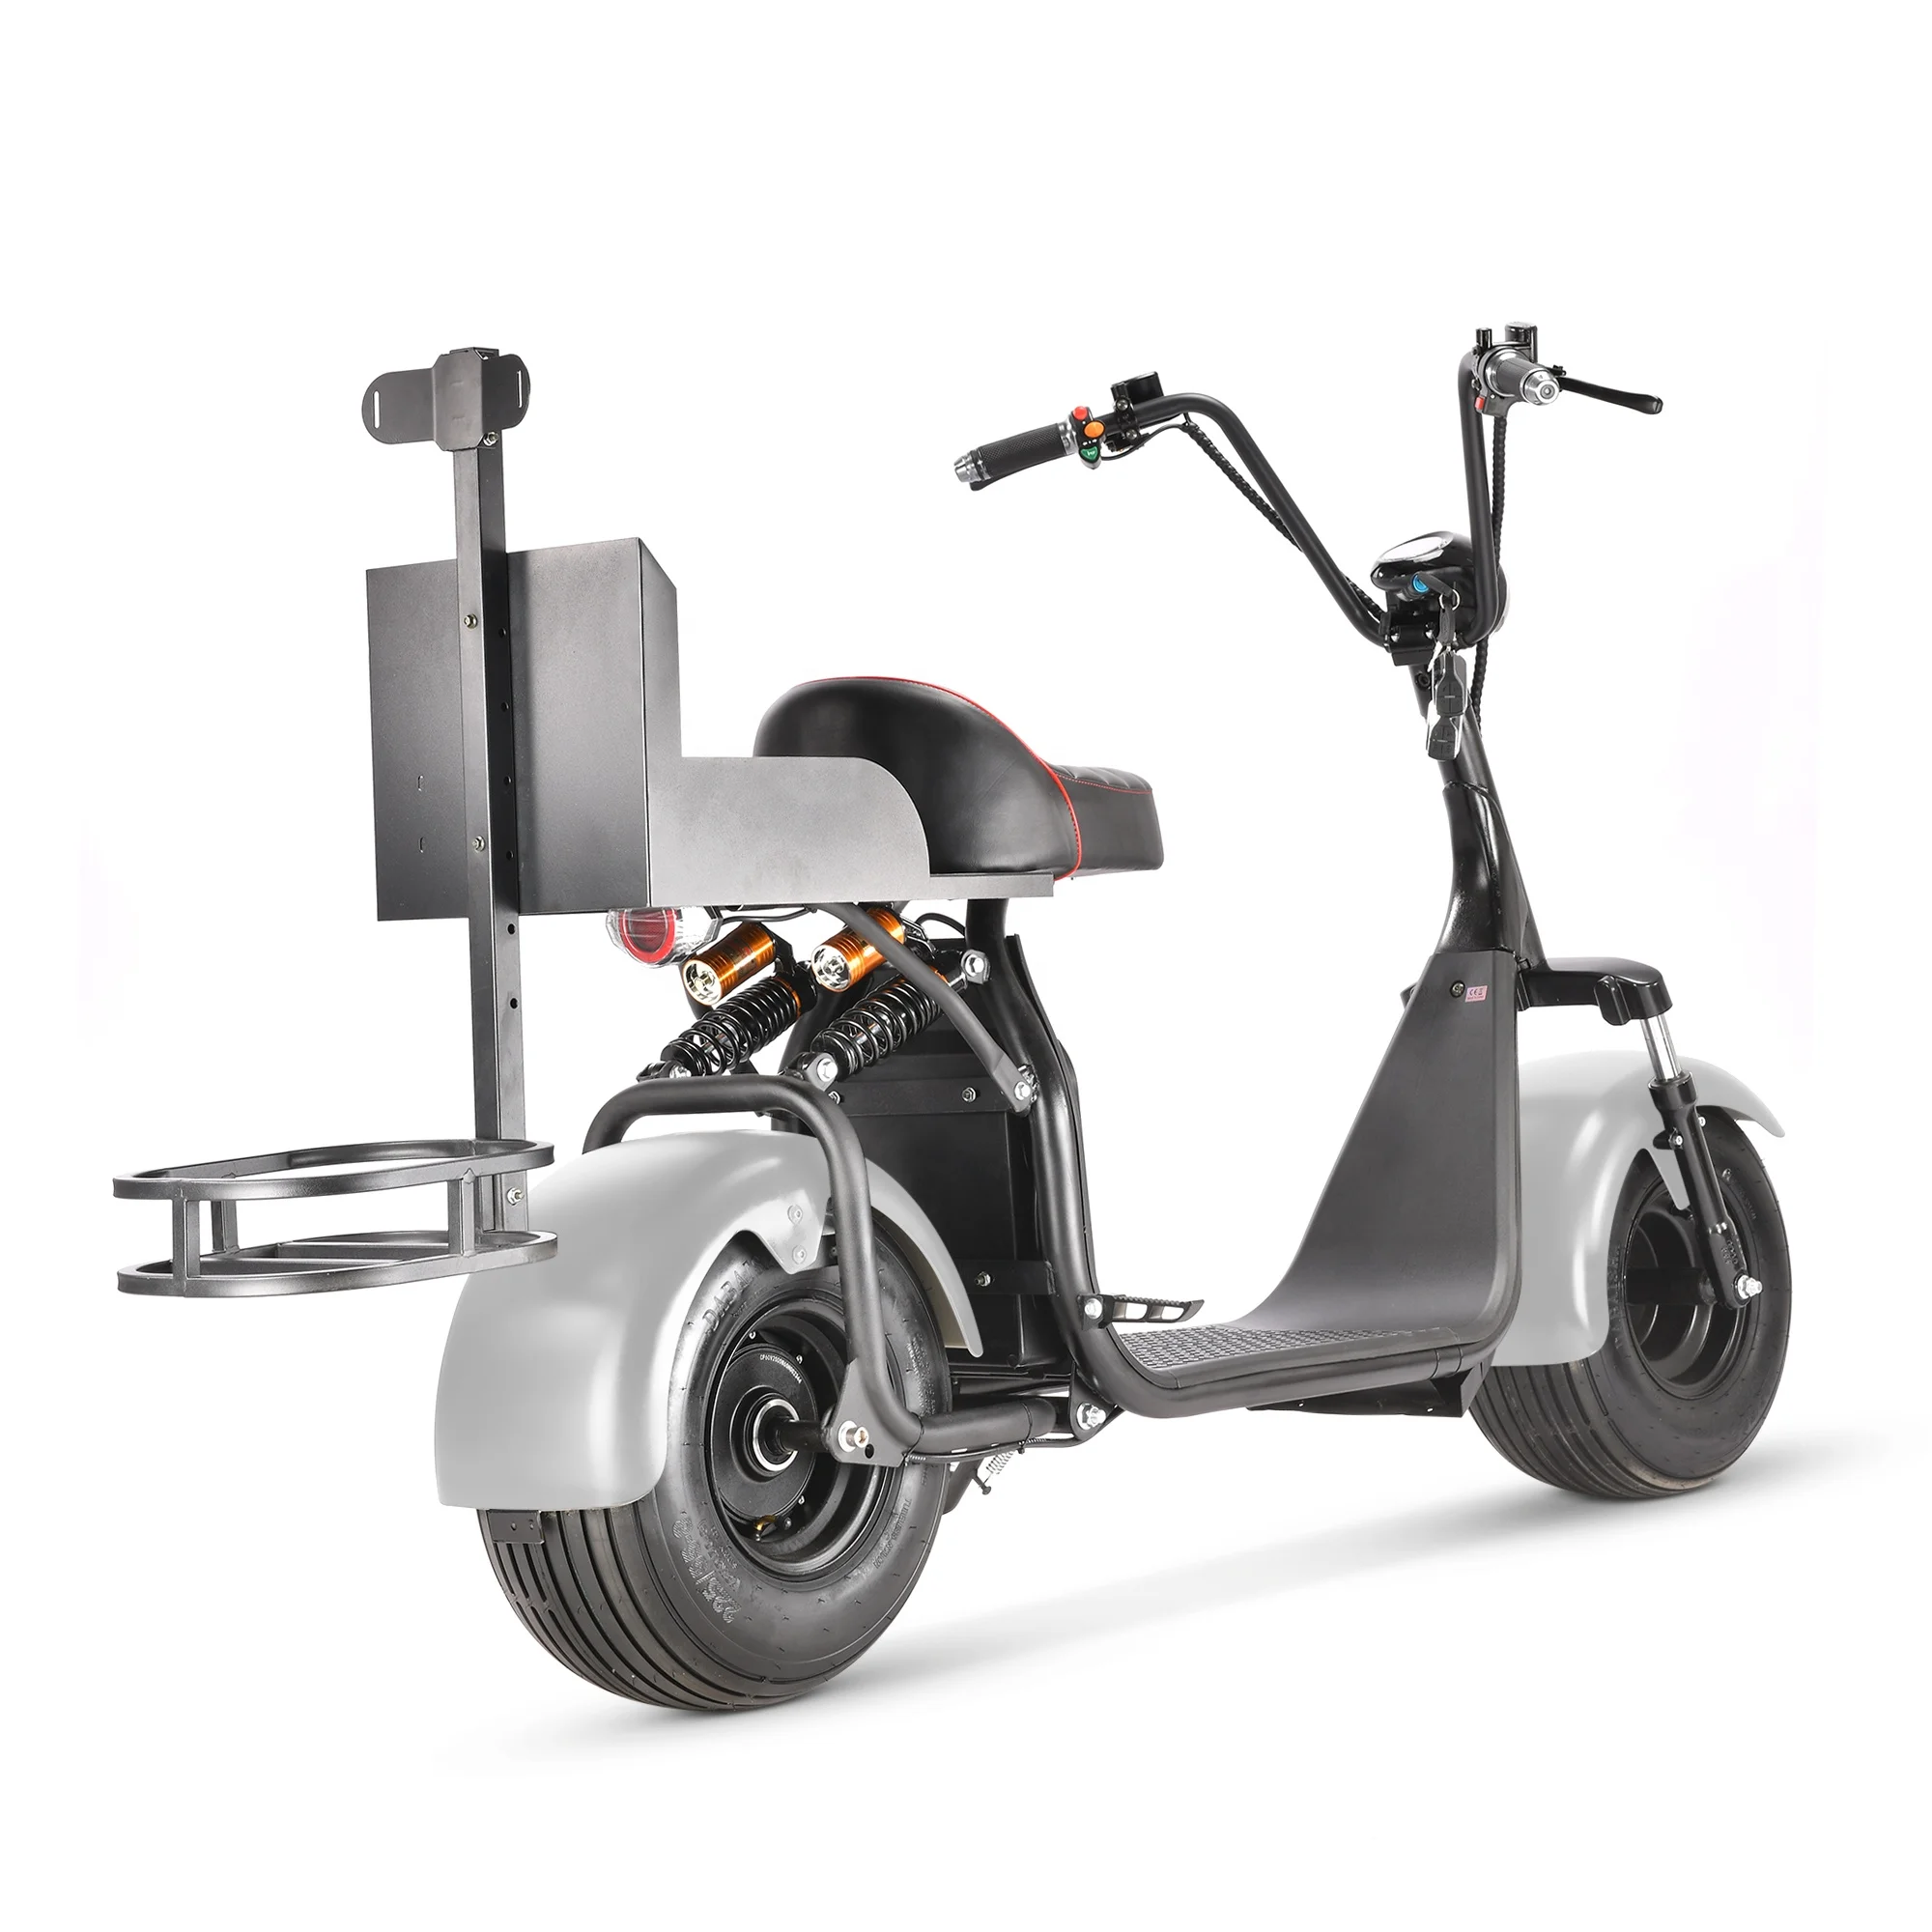 

2000w 60v20ah scooter citycoco golf scooter us warehouse Christmas gift chopper bikes chopper scooter DOT certificate motorcycle